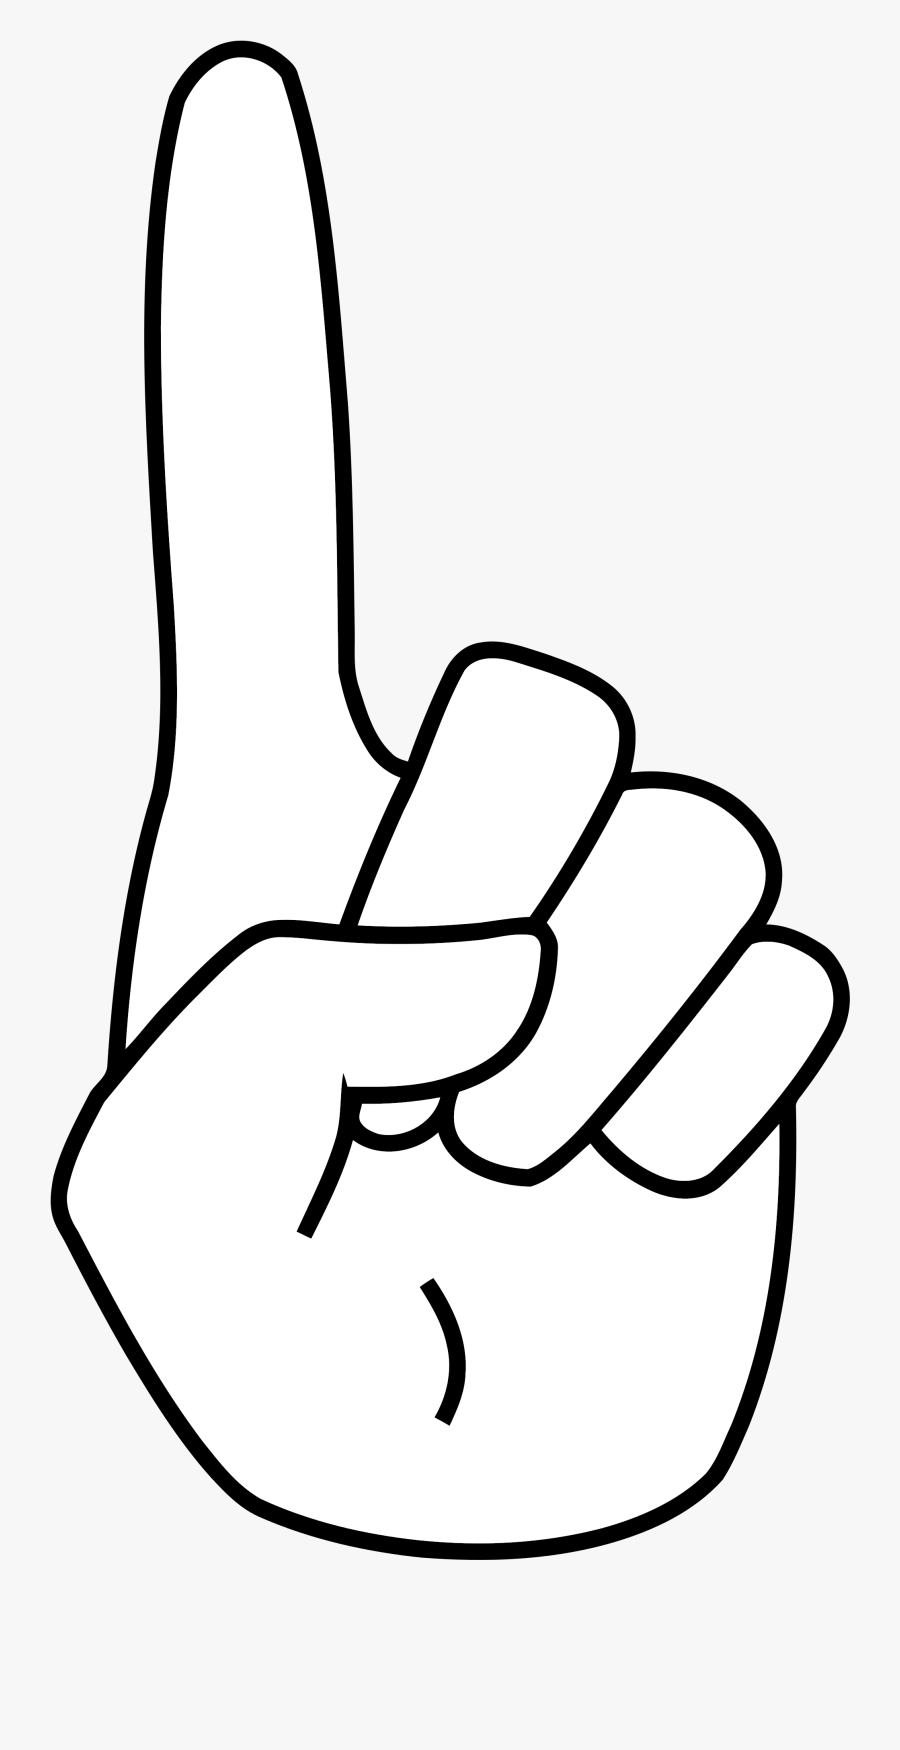 2000px Hand 1 Svg - Hand Number 1 Png, Transparent Clipart